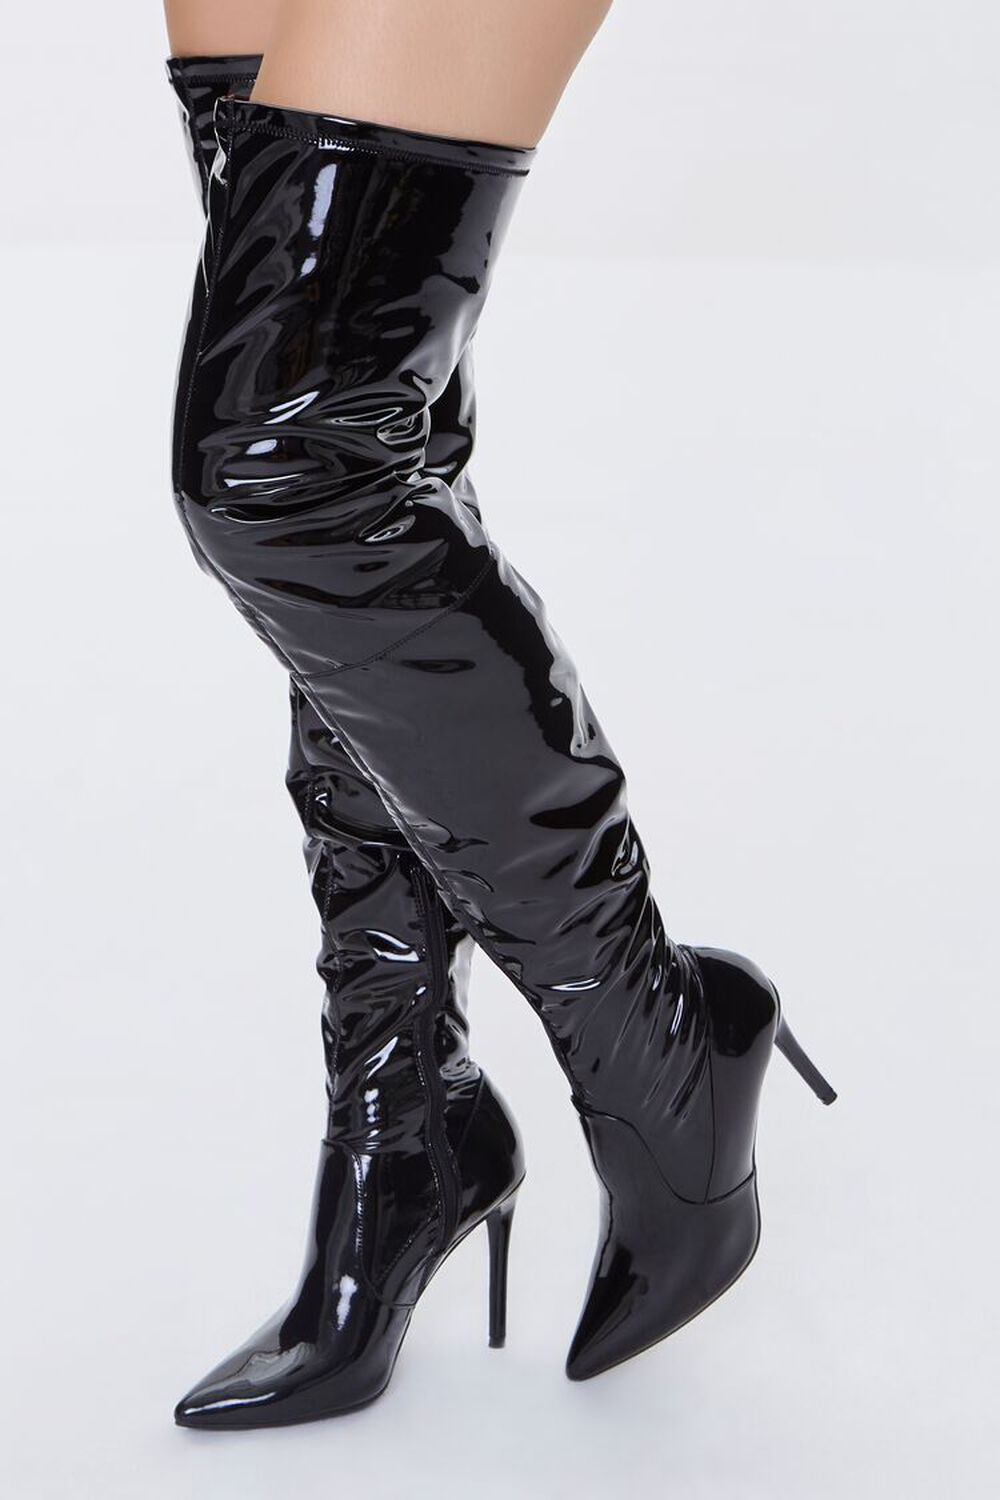 BLACK Faux Patent Leather Thigh-High Boots, image 1